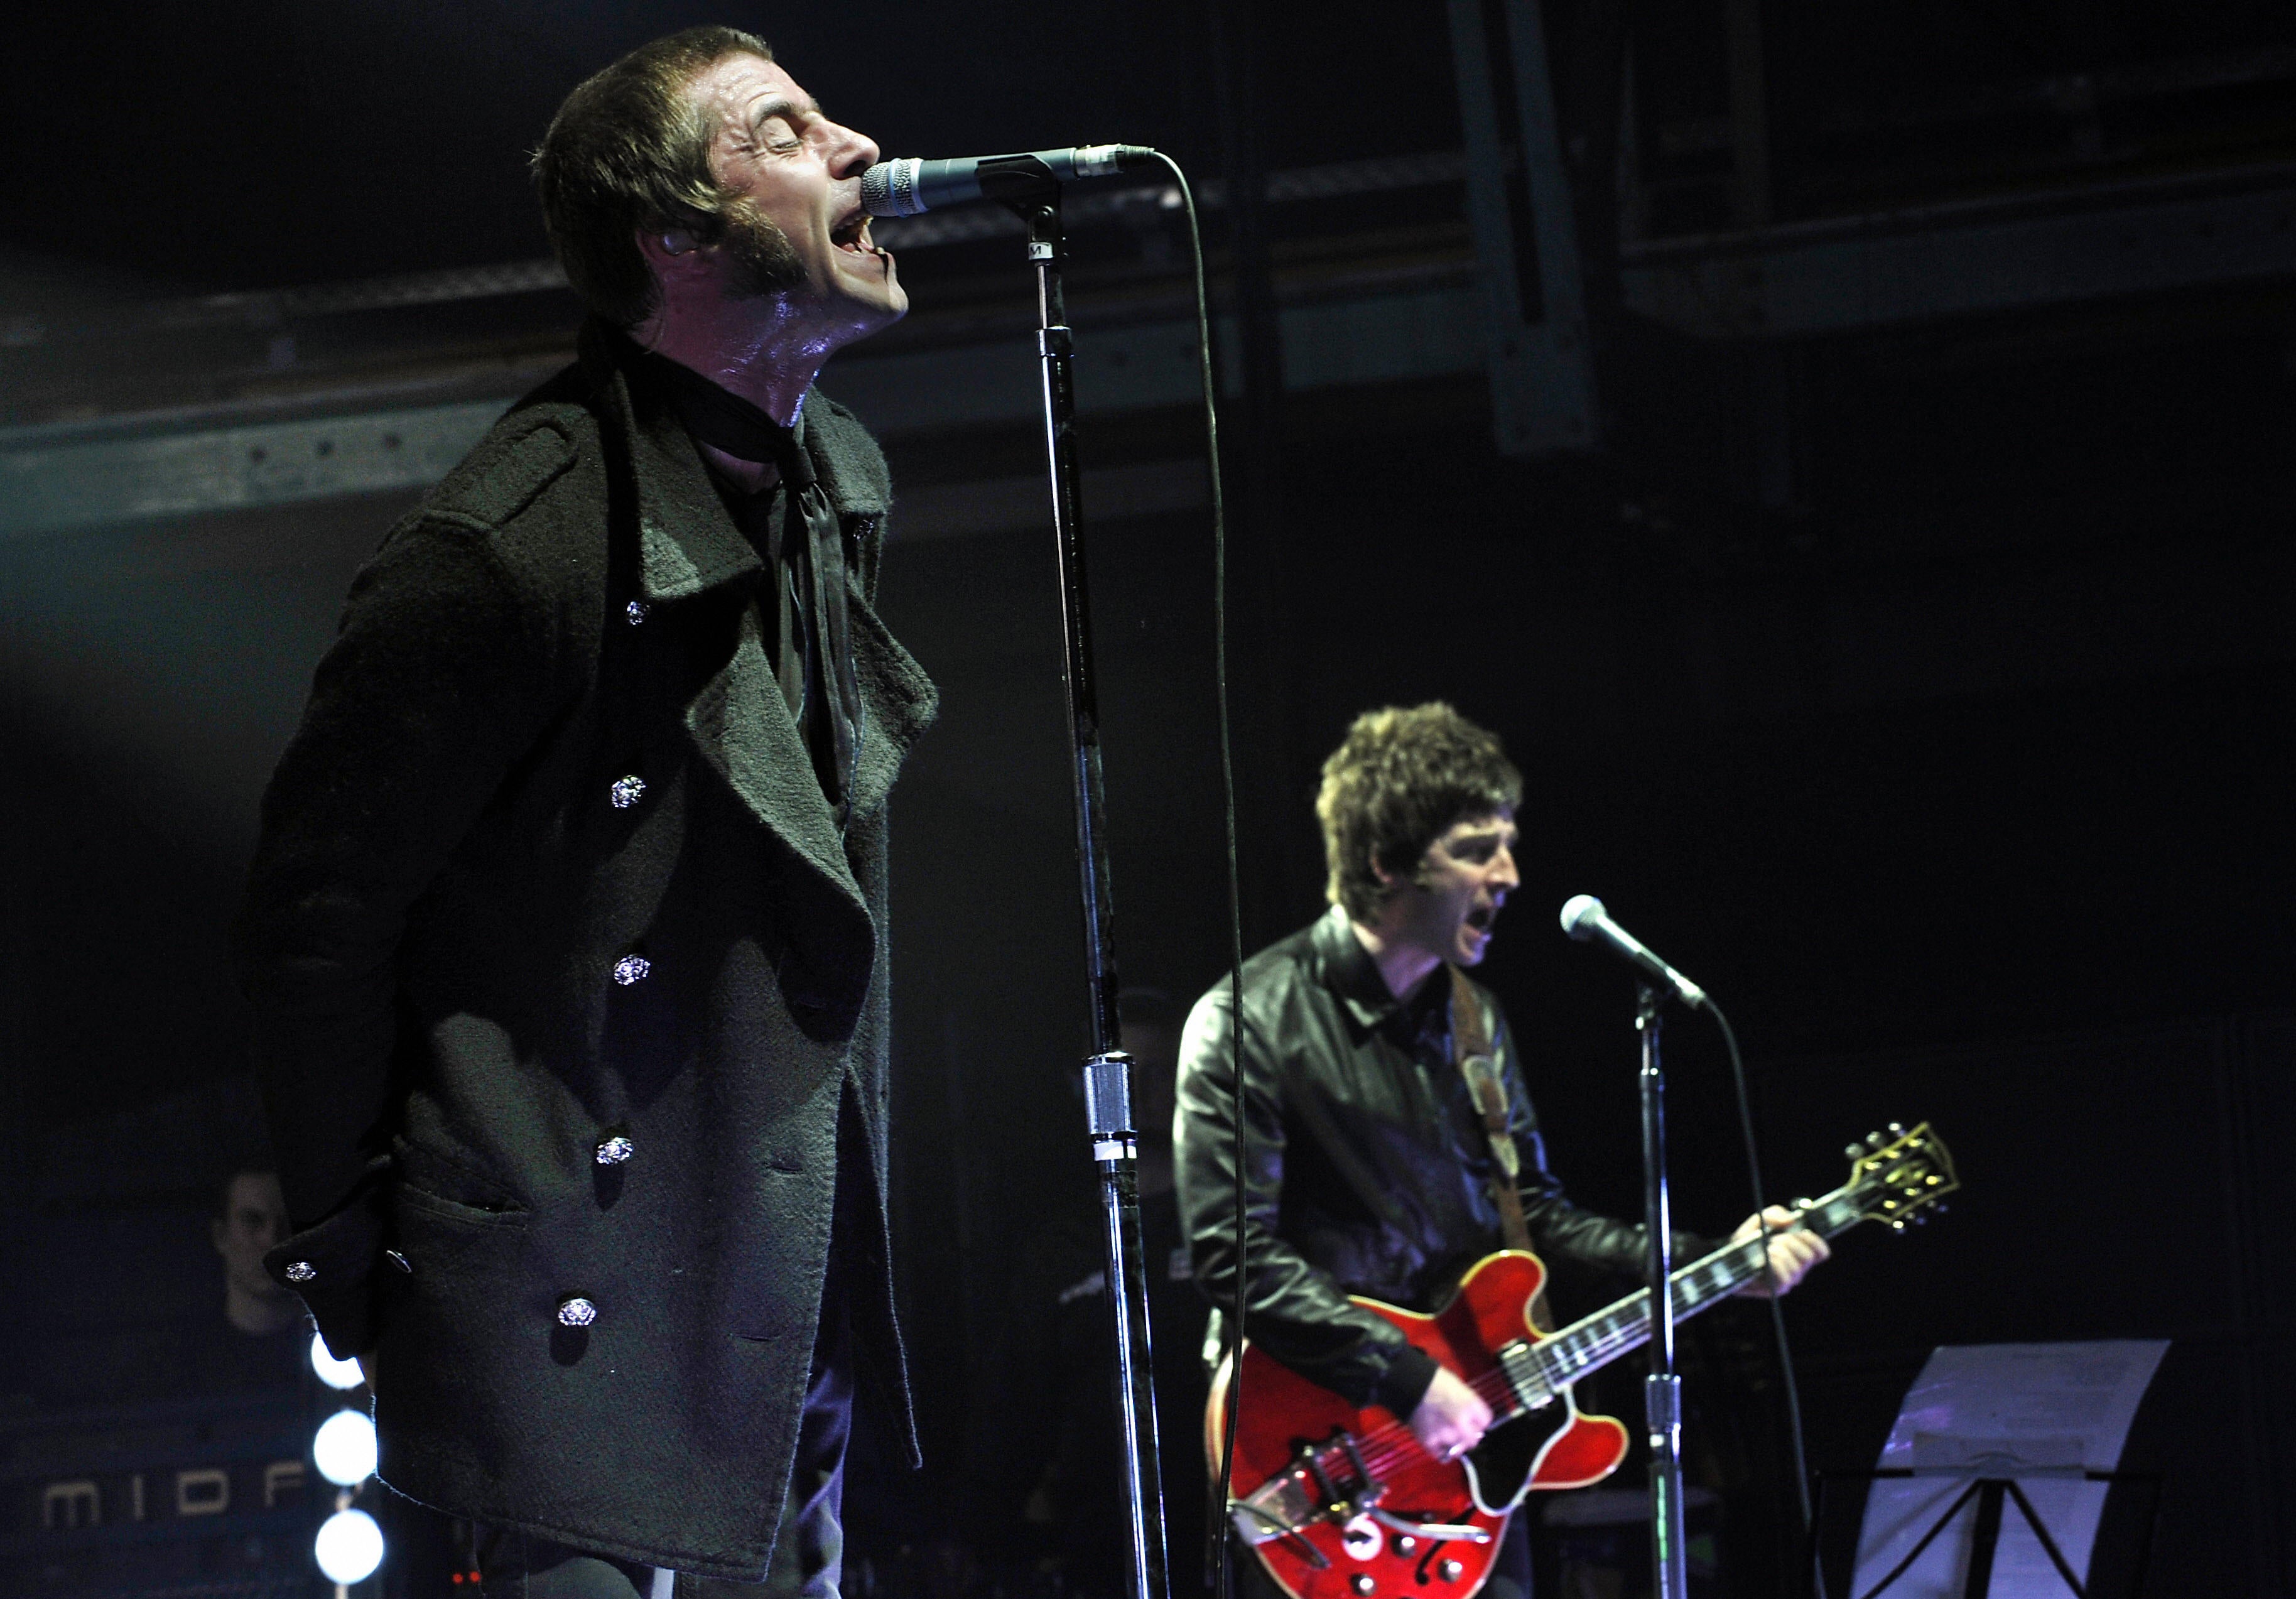 Liam and Noel Gallagher performing as part of Oasis in 2009